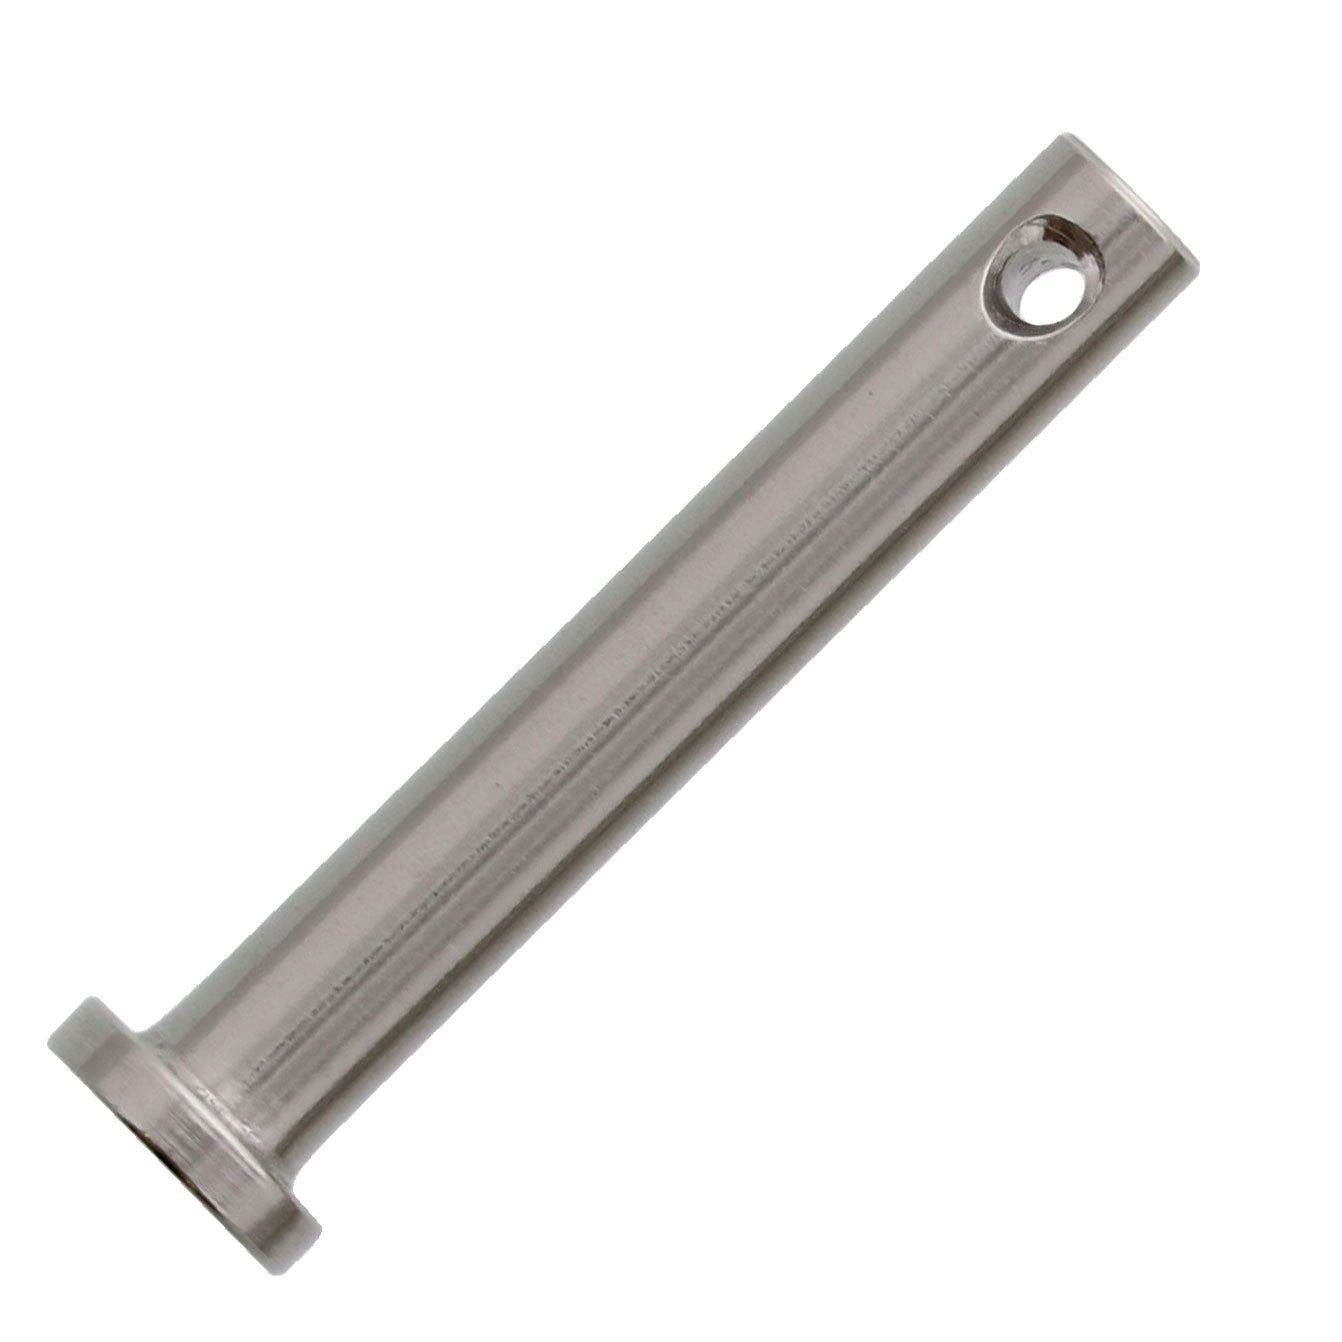 6mm x 32mm Stainless Steel Clevis Pin